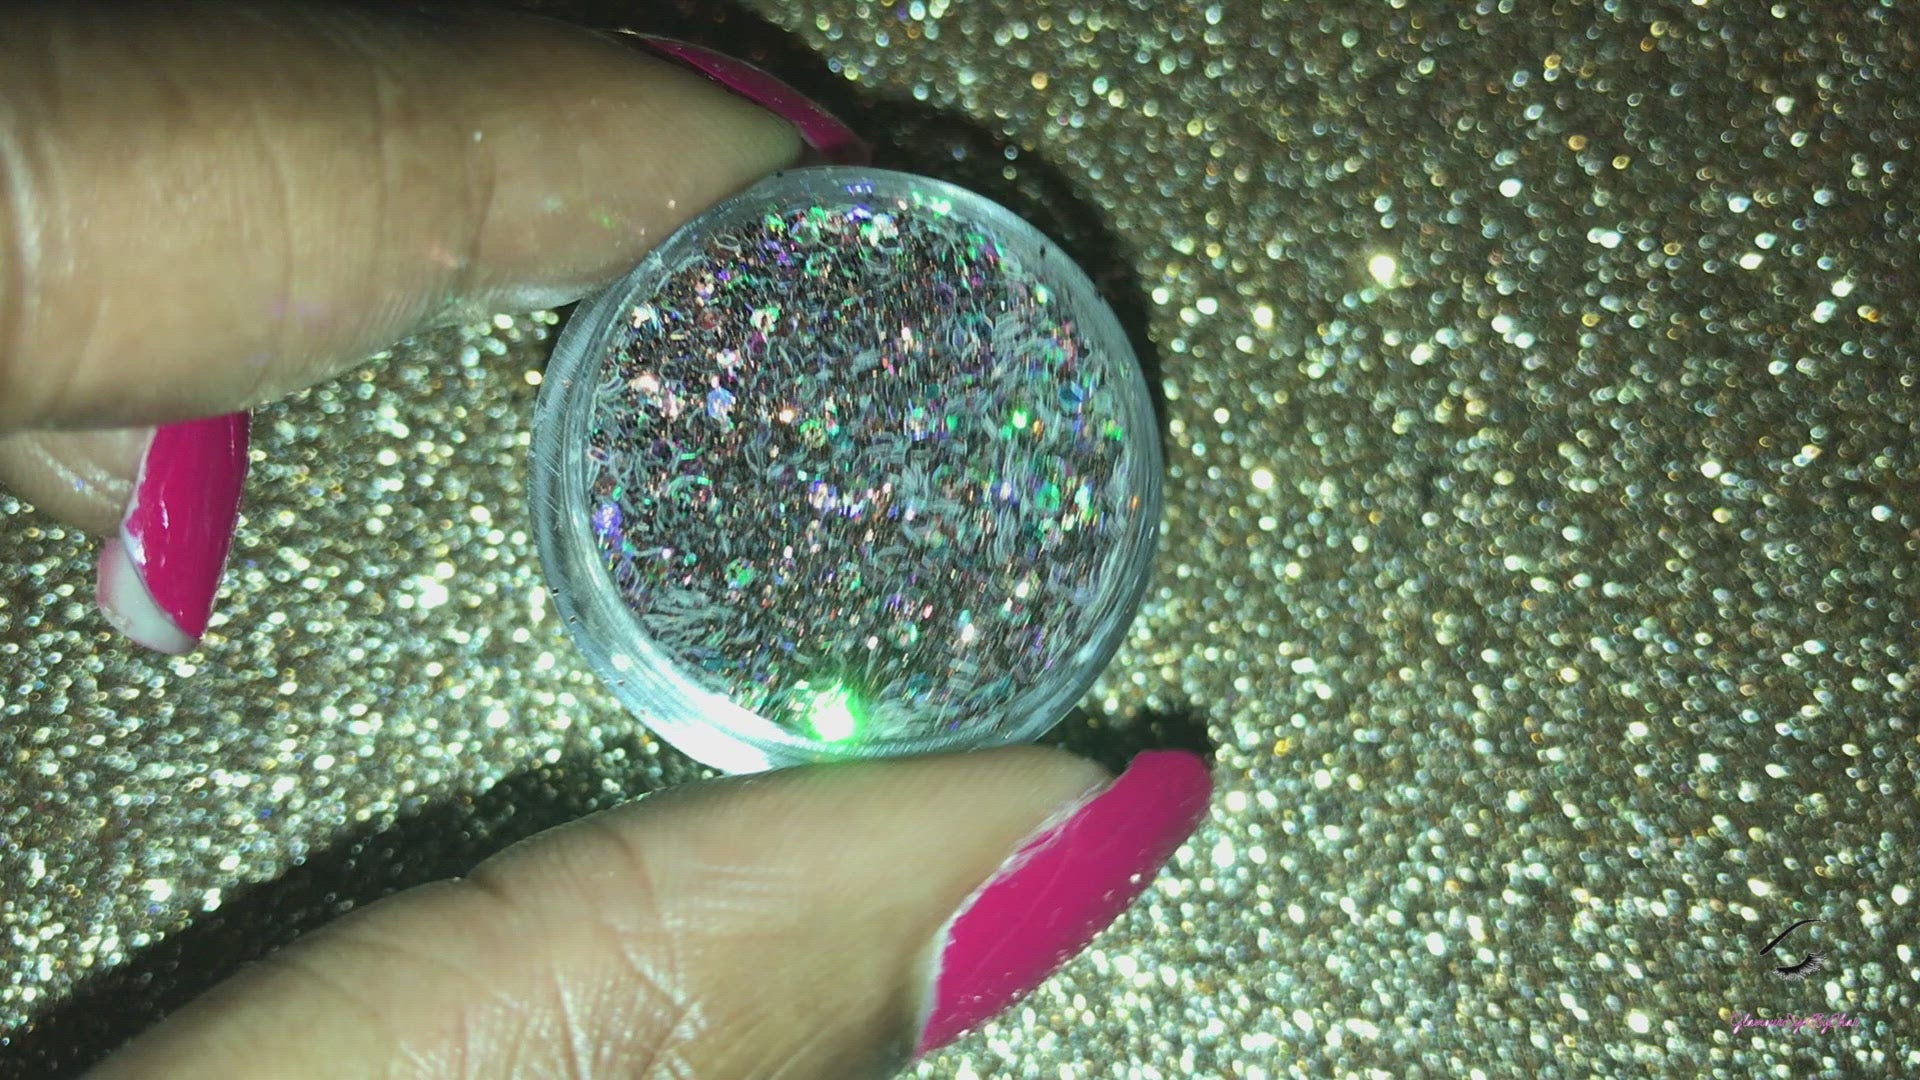 This glitter is called Fondue and is part of the chunky glitter collection. It consists of chocolate brown glitter with an iridescent sparkle. Fondue can be used for your face, body, hair and nails. Comes in 5g and 10g jars.  **Glitter will be discontinued once sold out**